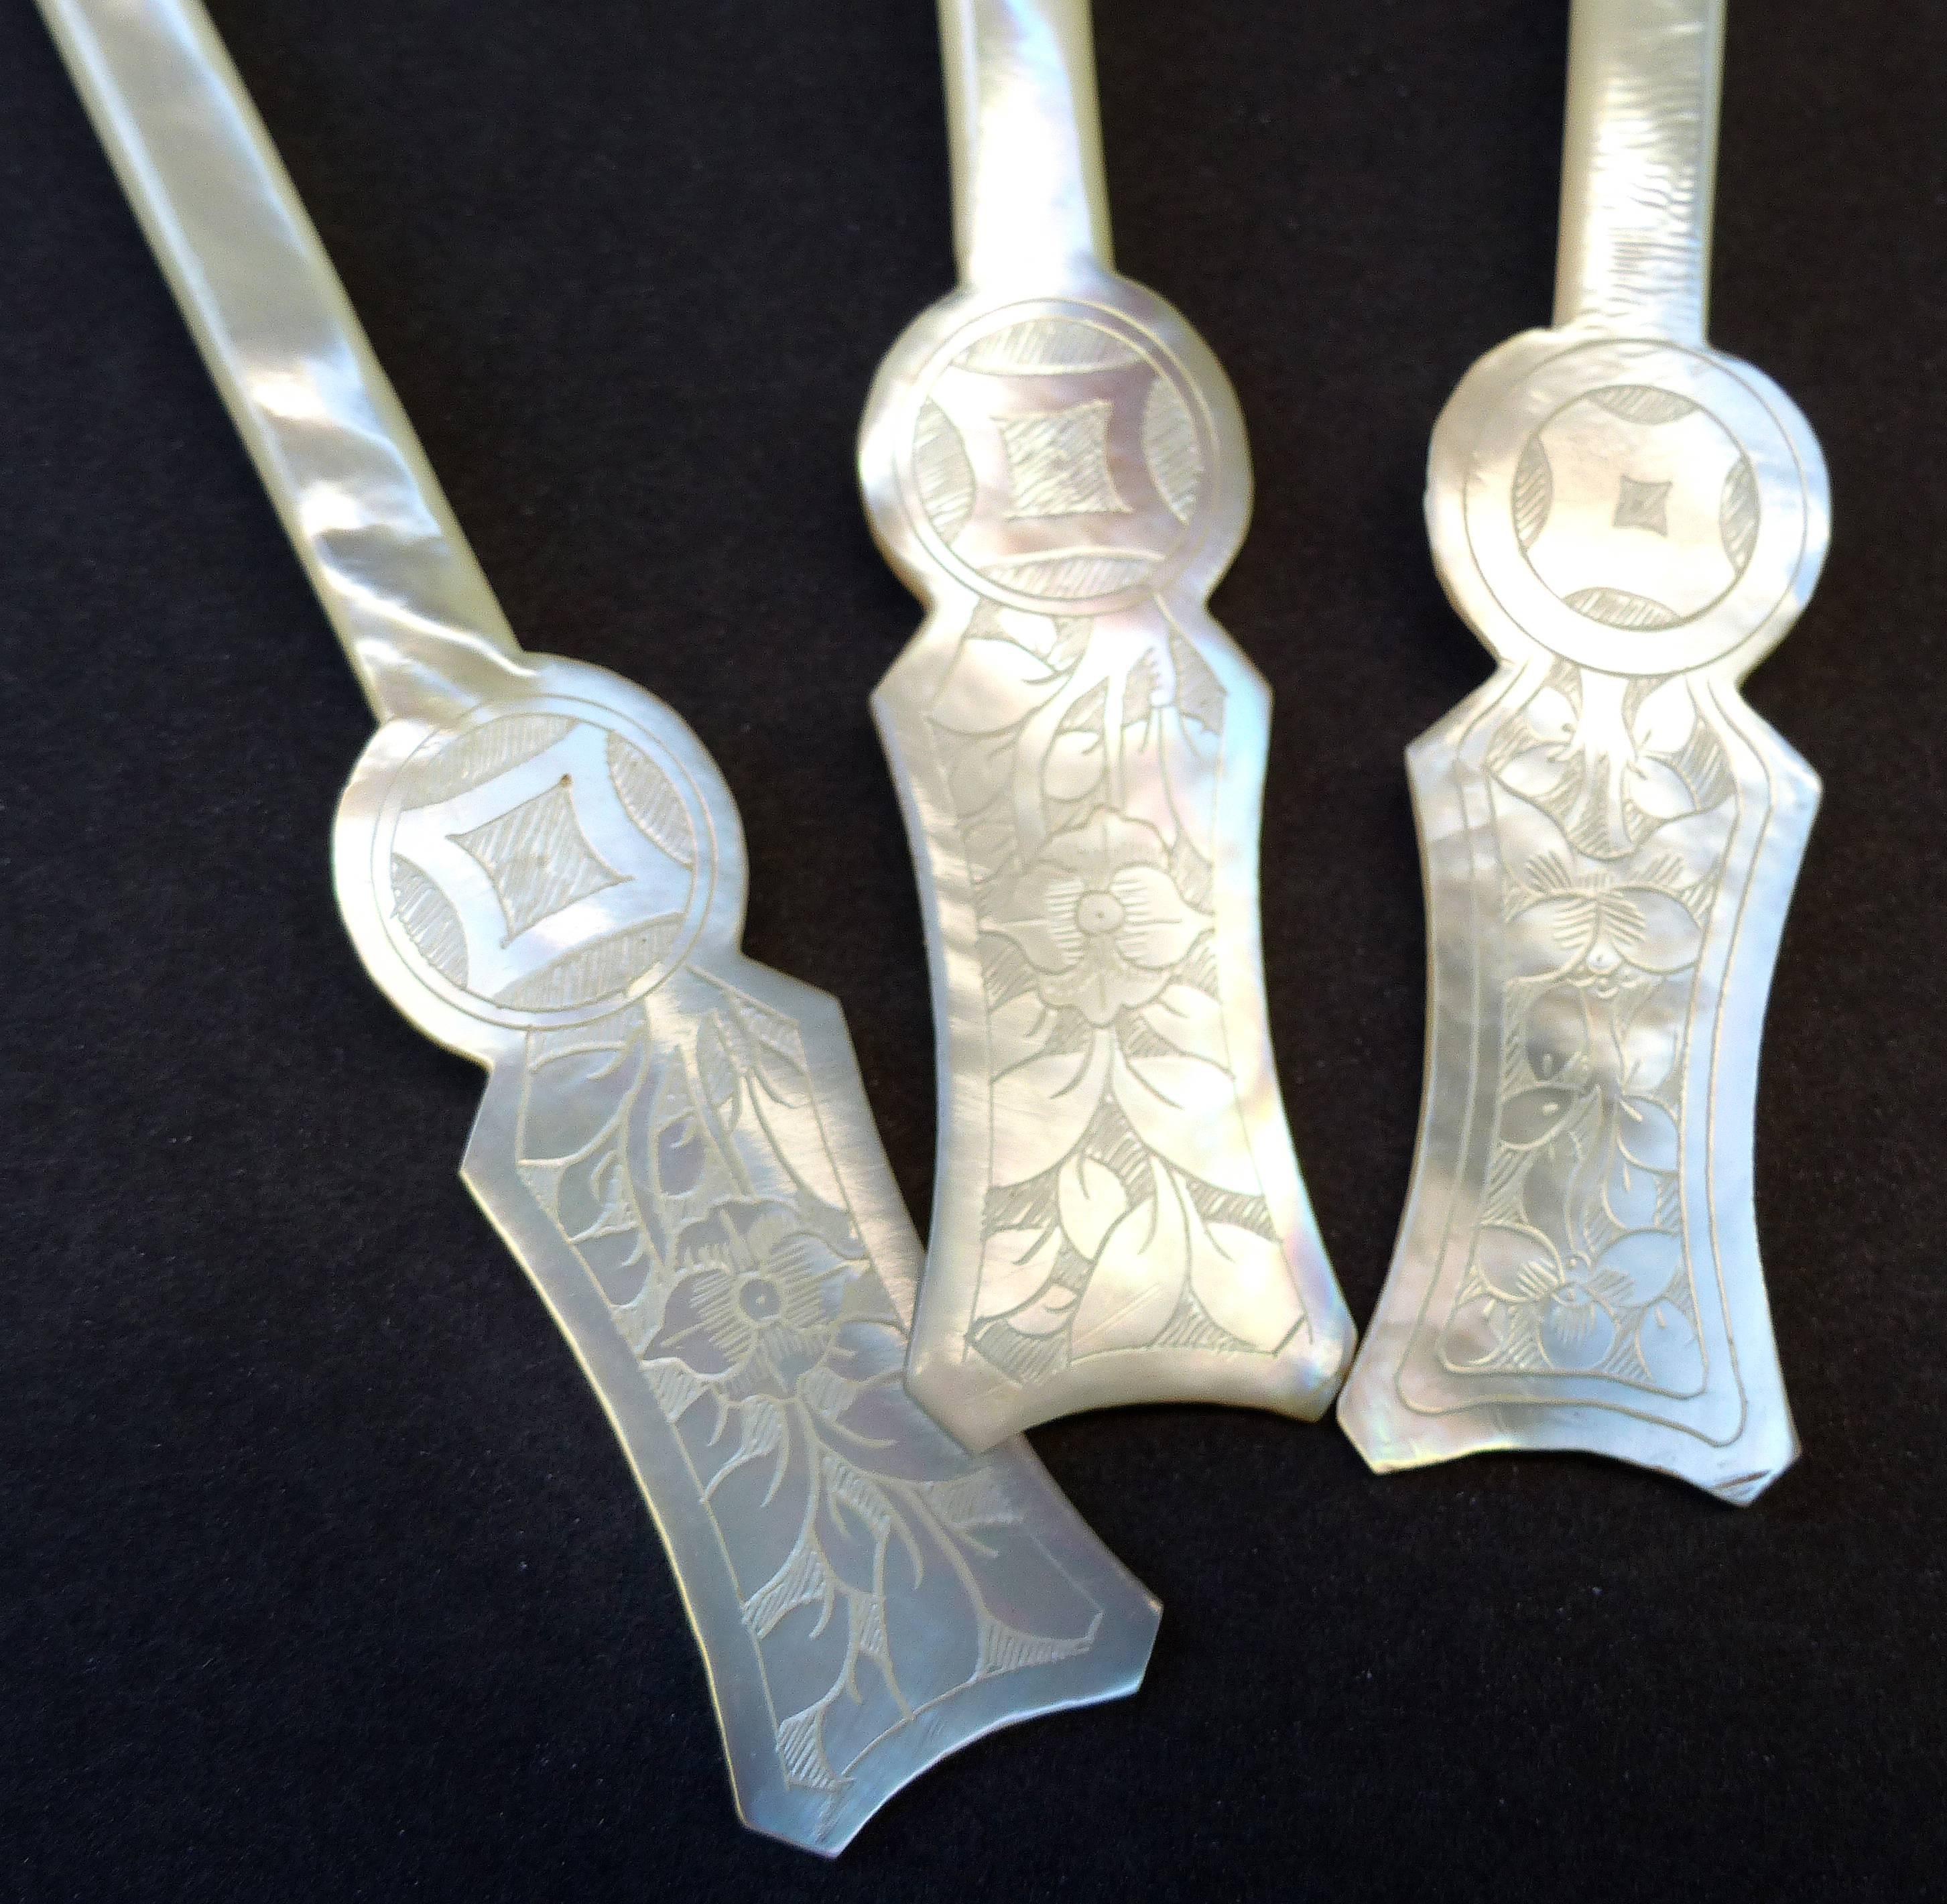 mother of pearl caviar spoon set